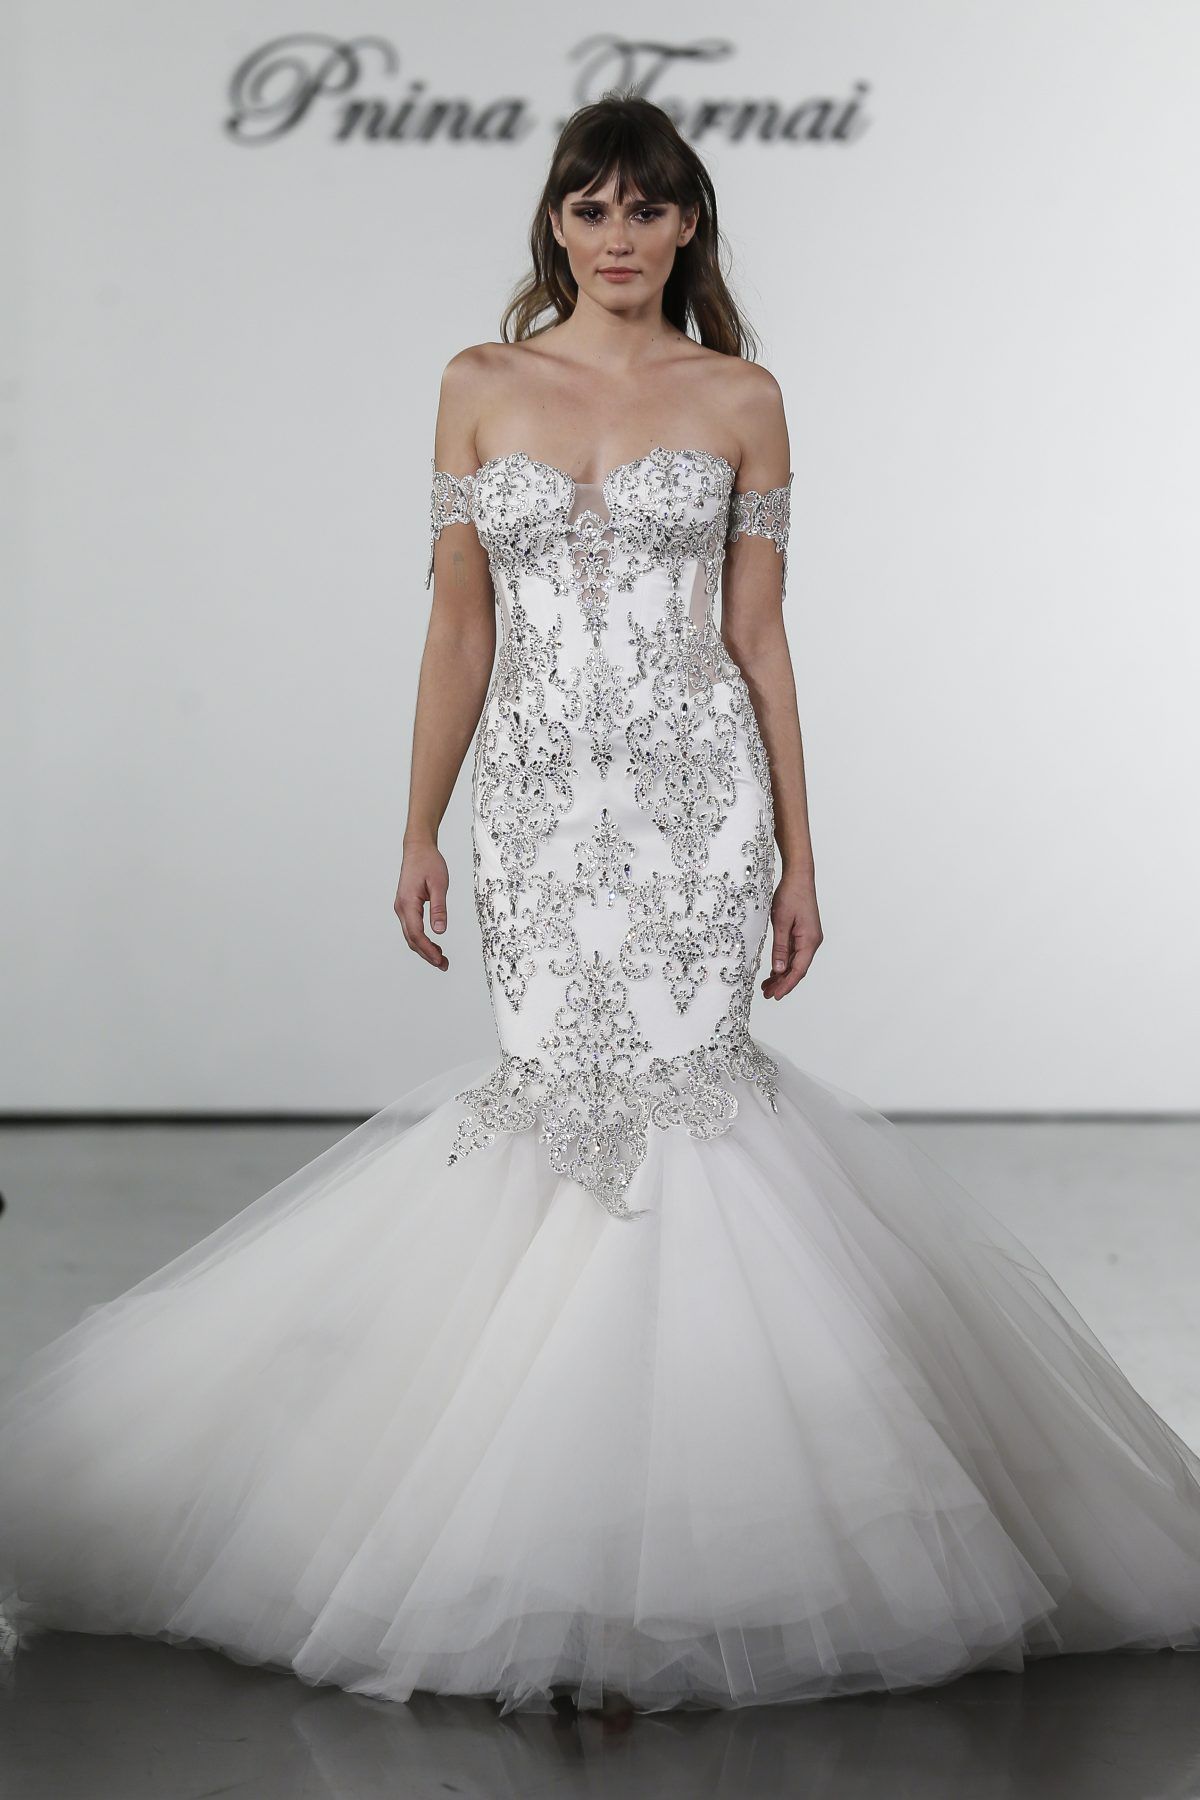 Top 10 Most Expensive Wedding Dress Designers in 2022